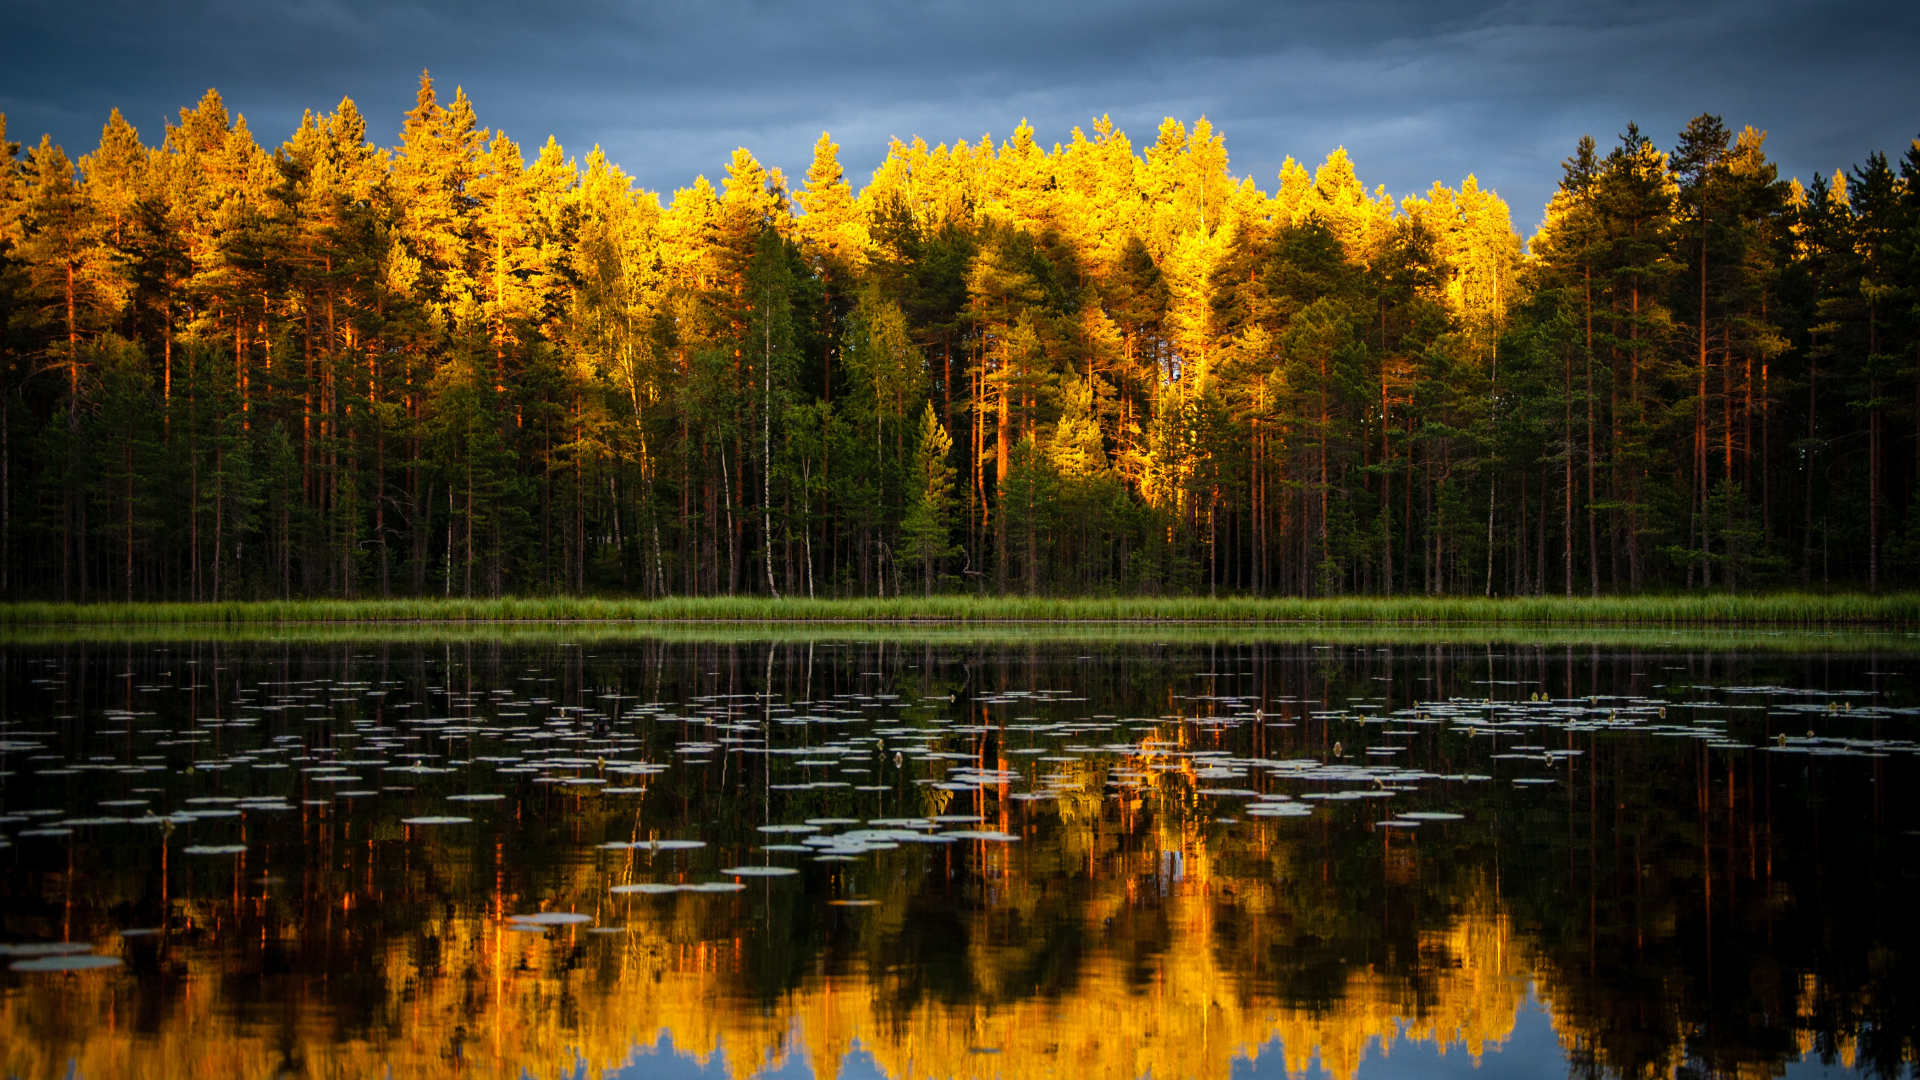 General 1920x1080 nature trees lake clouds sunset sunlight forest reflection